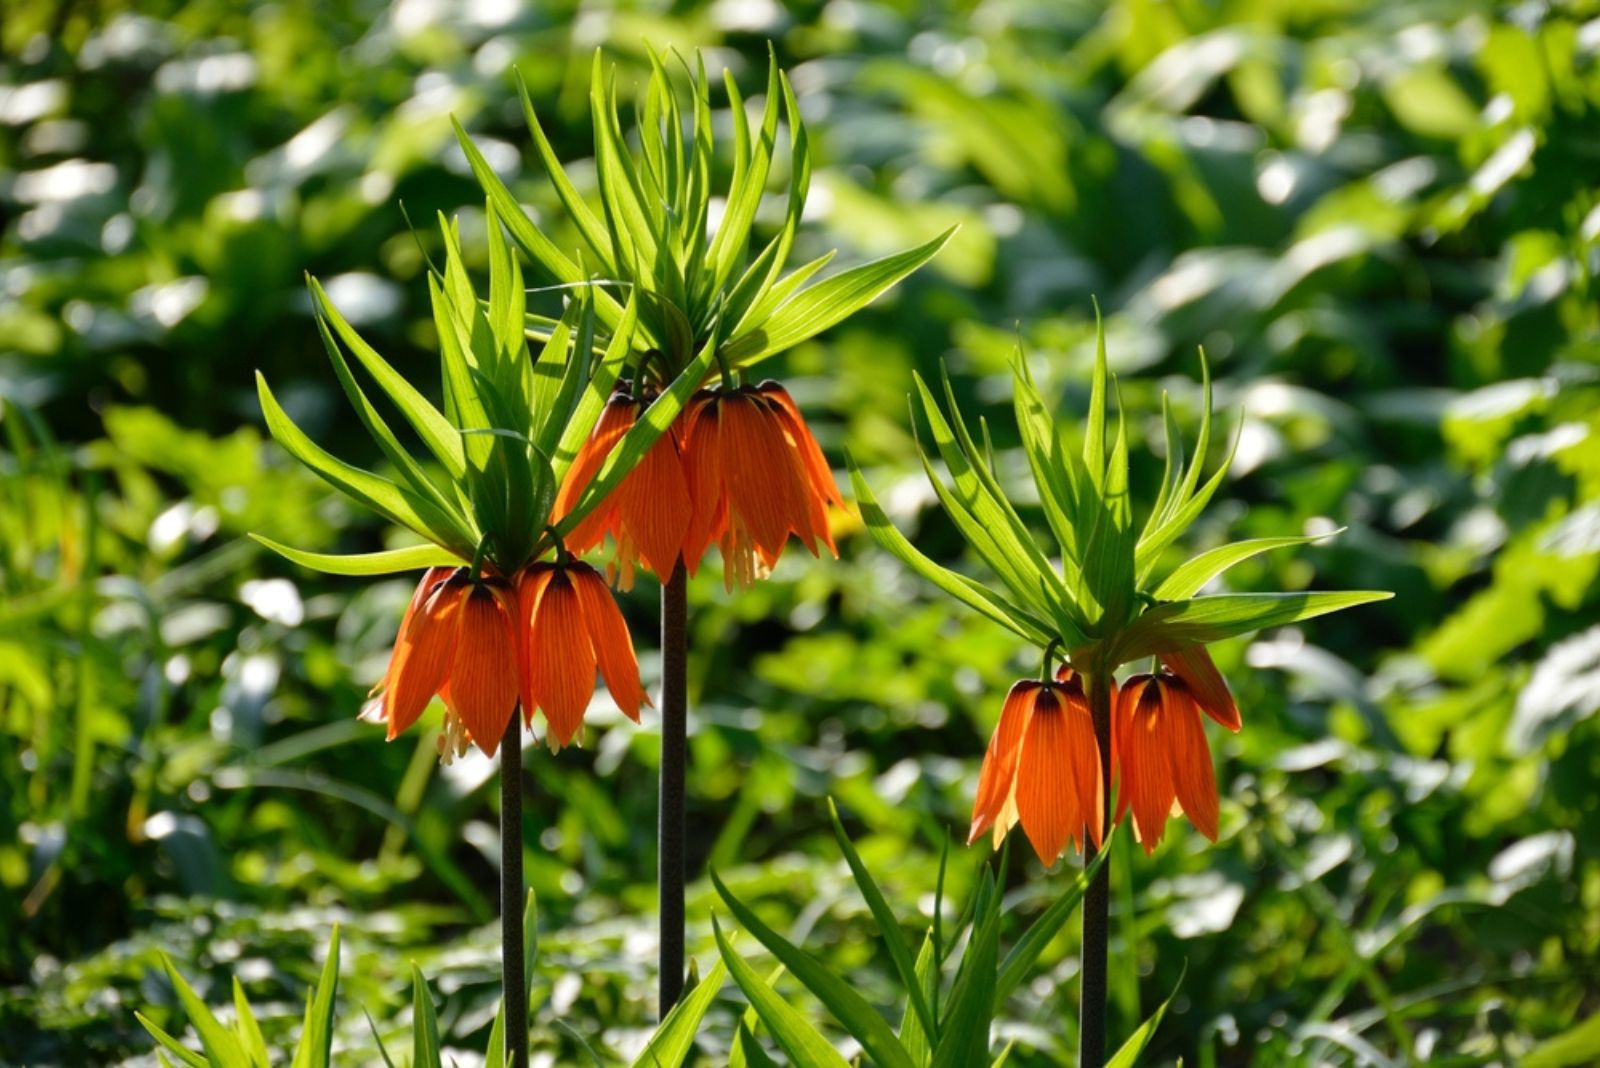 Amazing Fritillária blooming on a bright sunny day